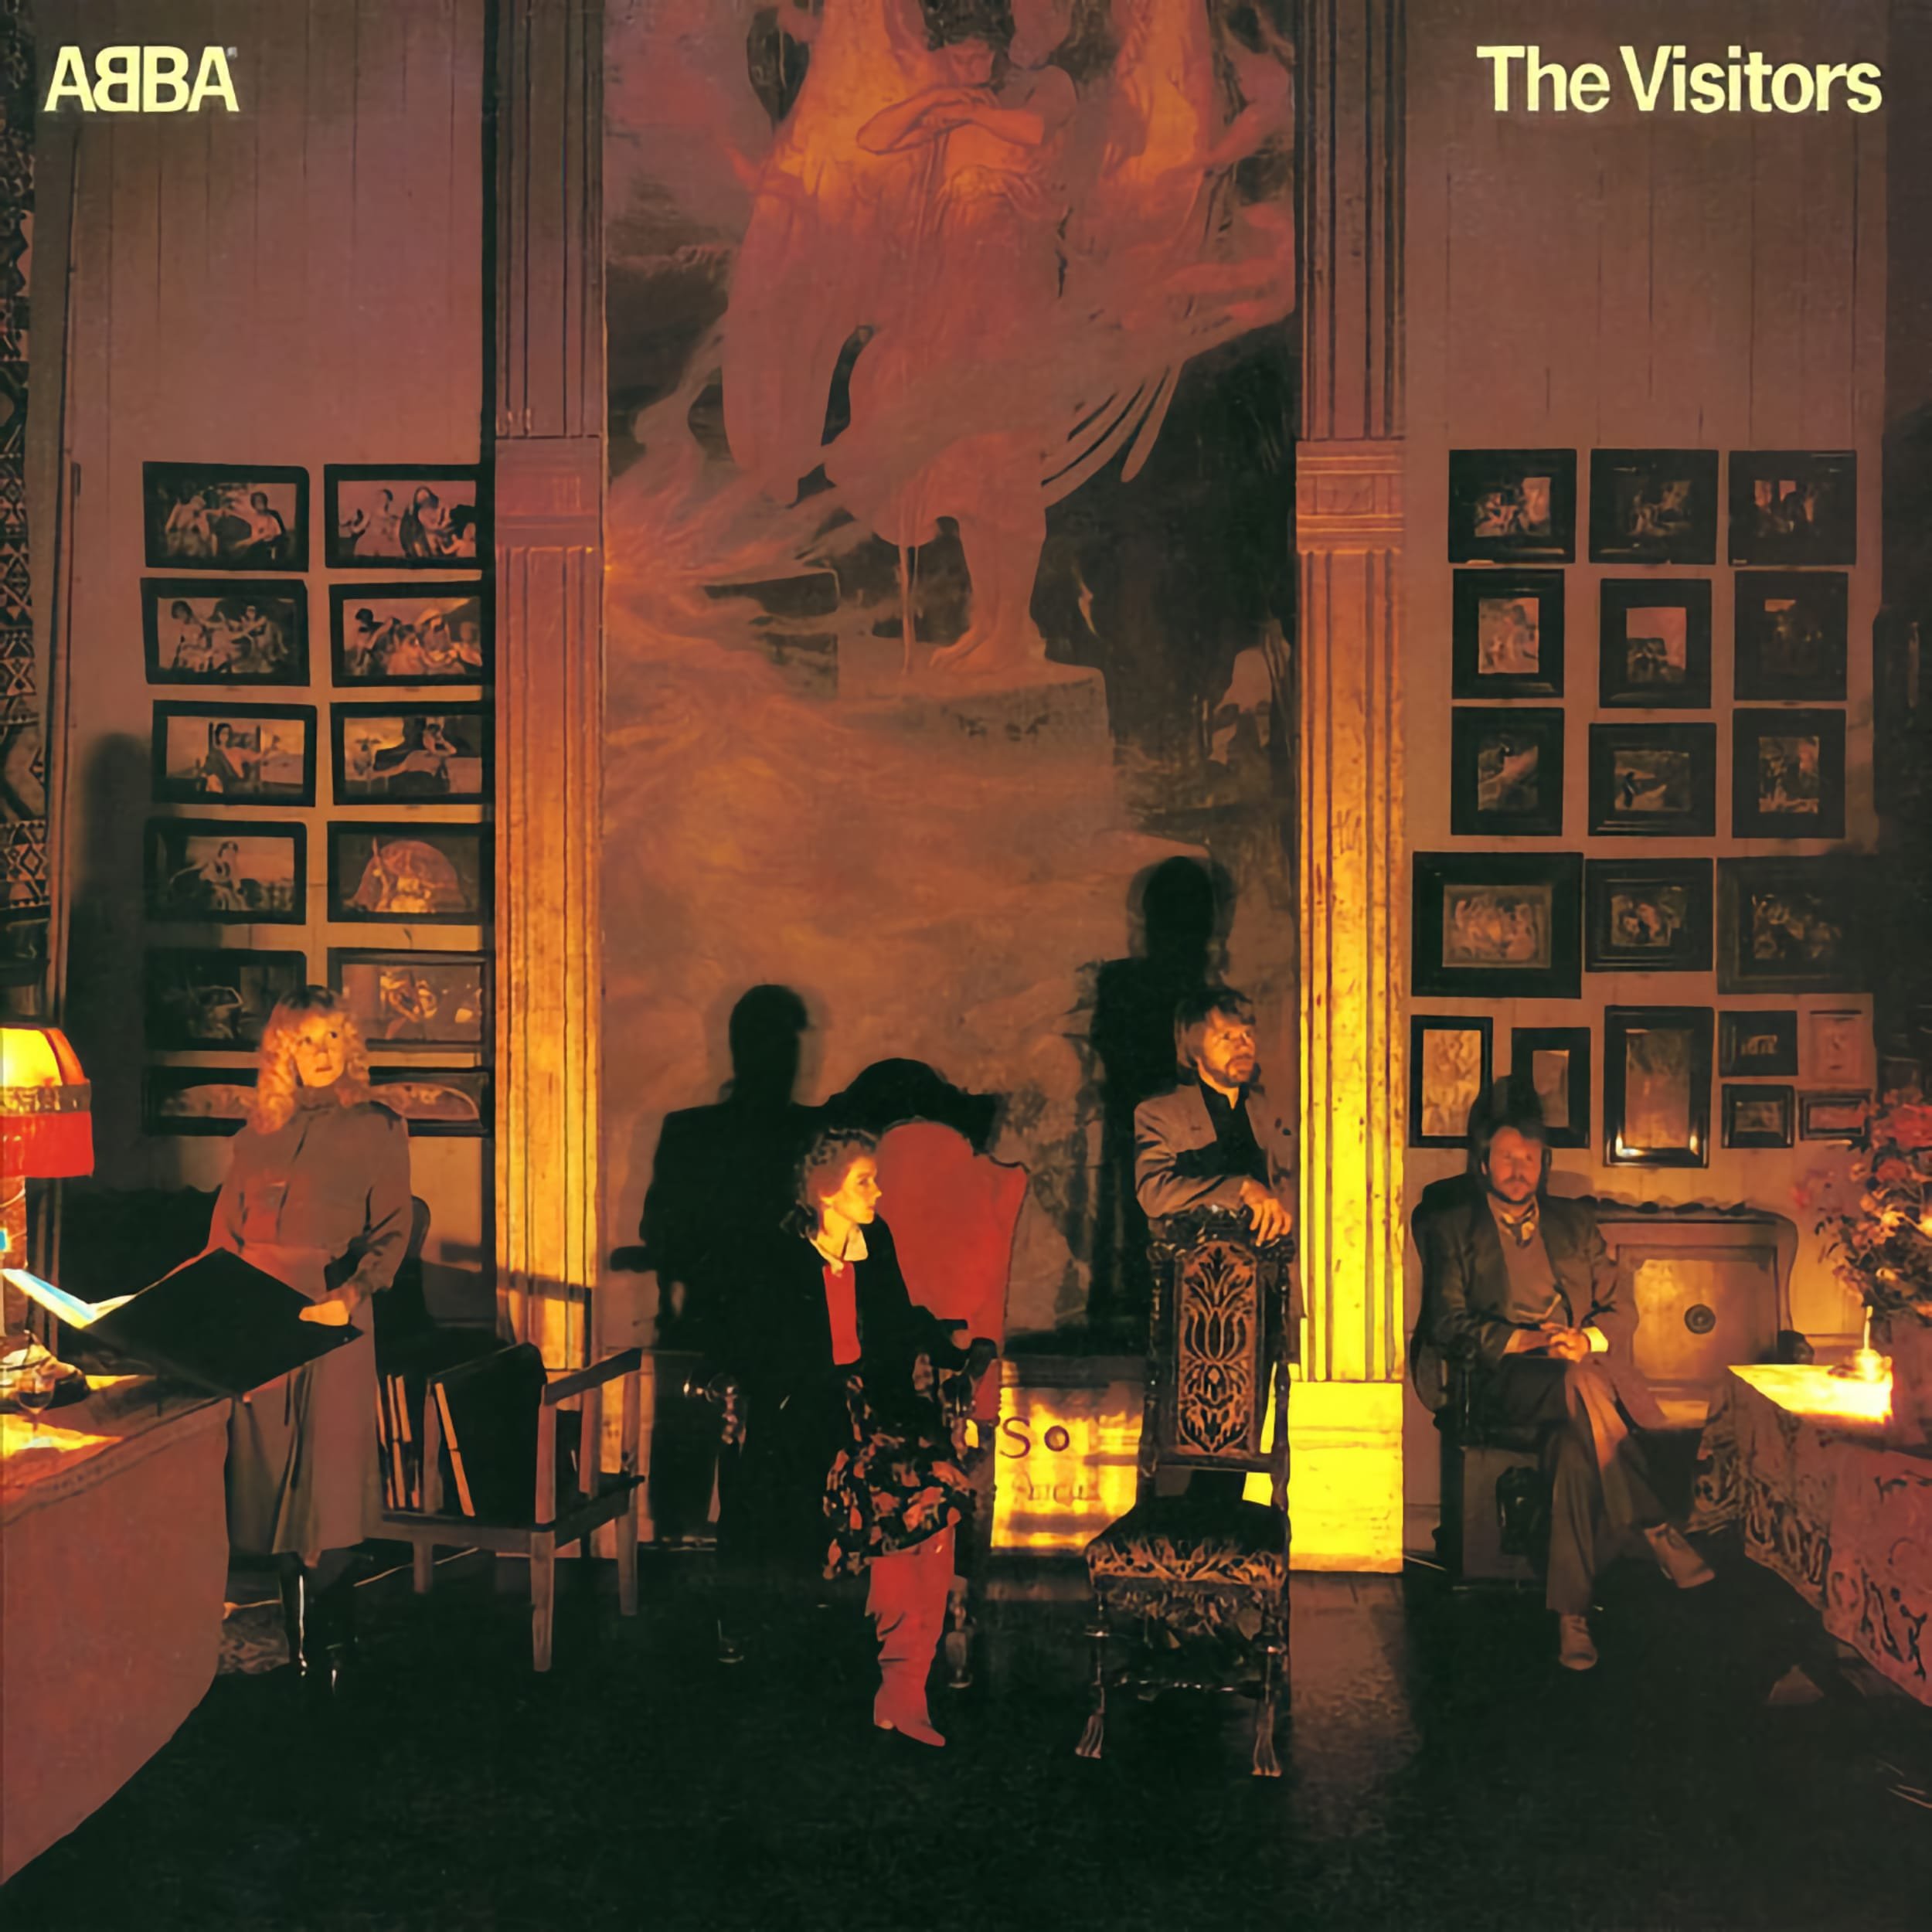 ABBA – The Visitors (Album Review) — Subjective Sounds